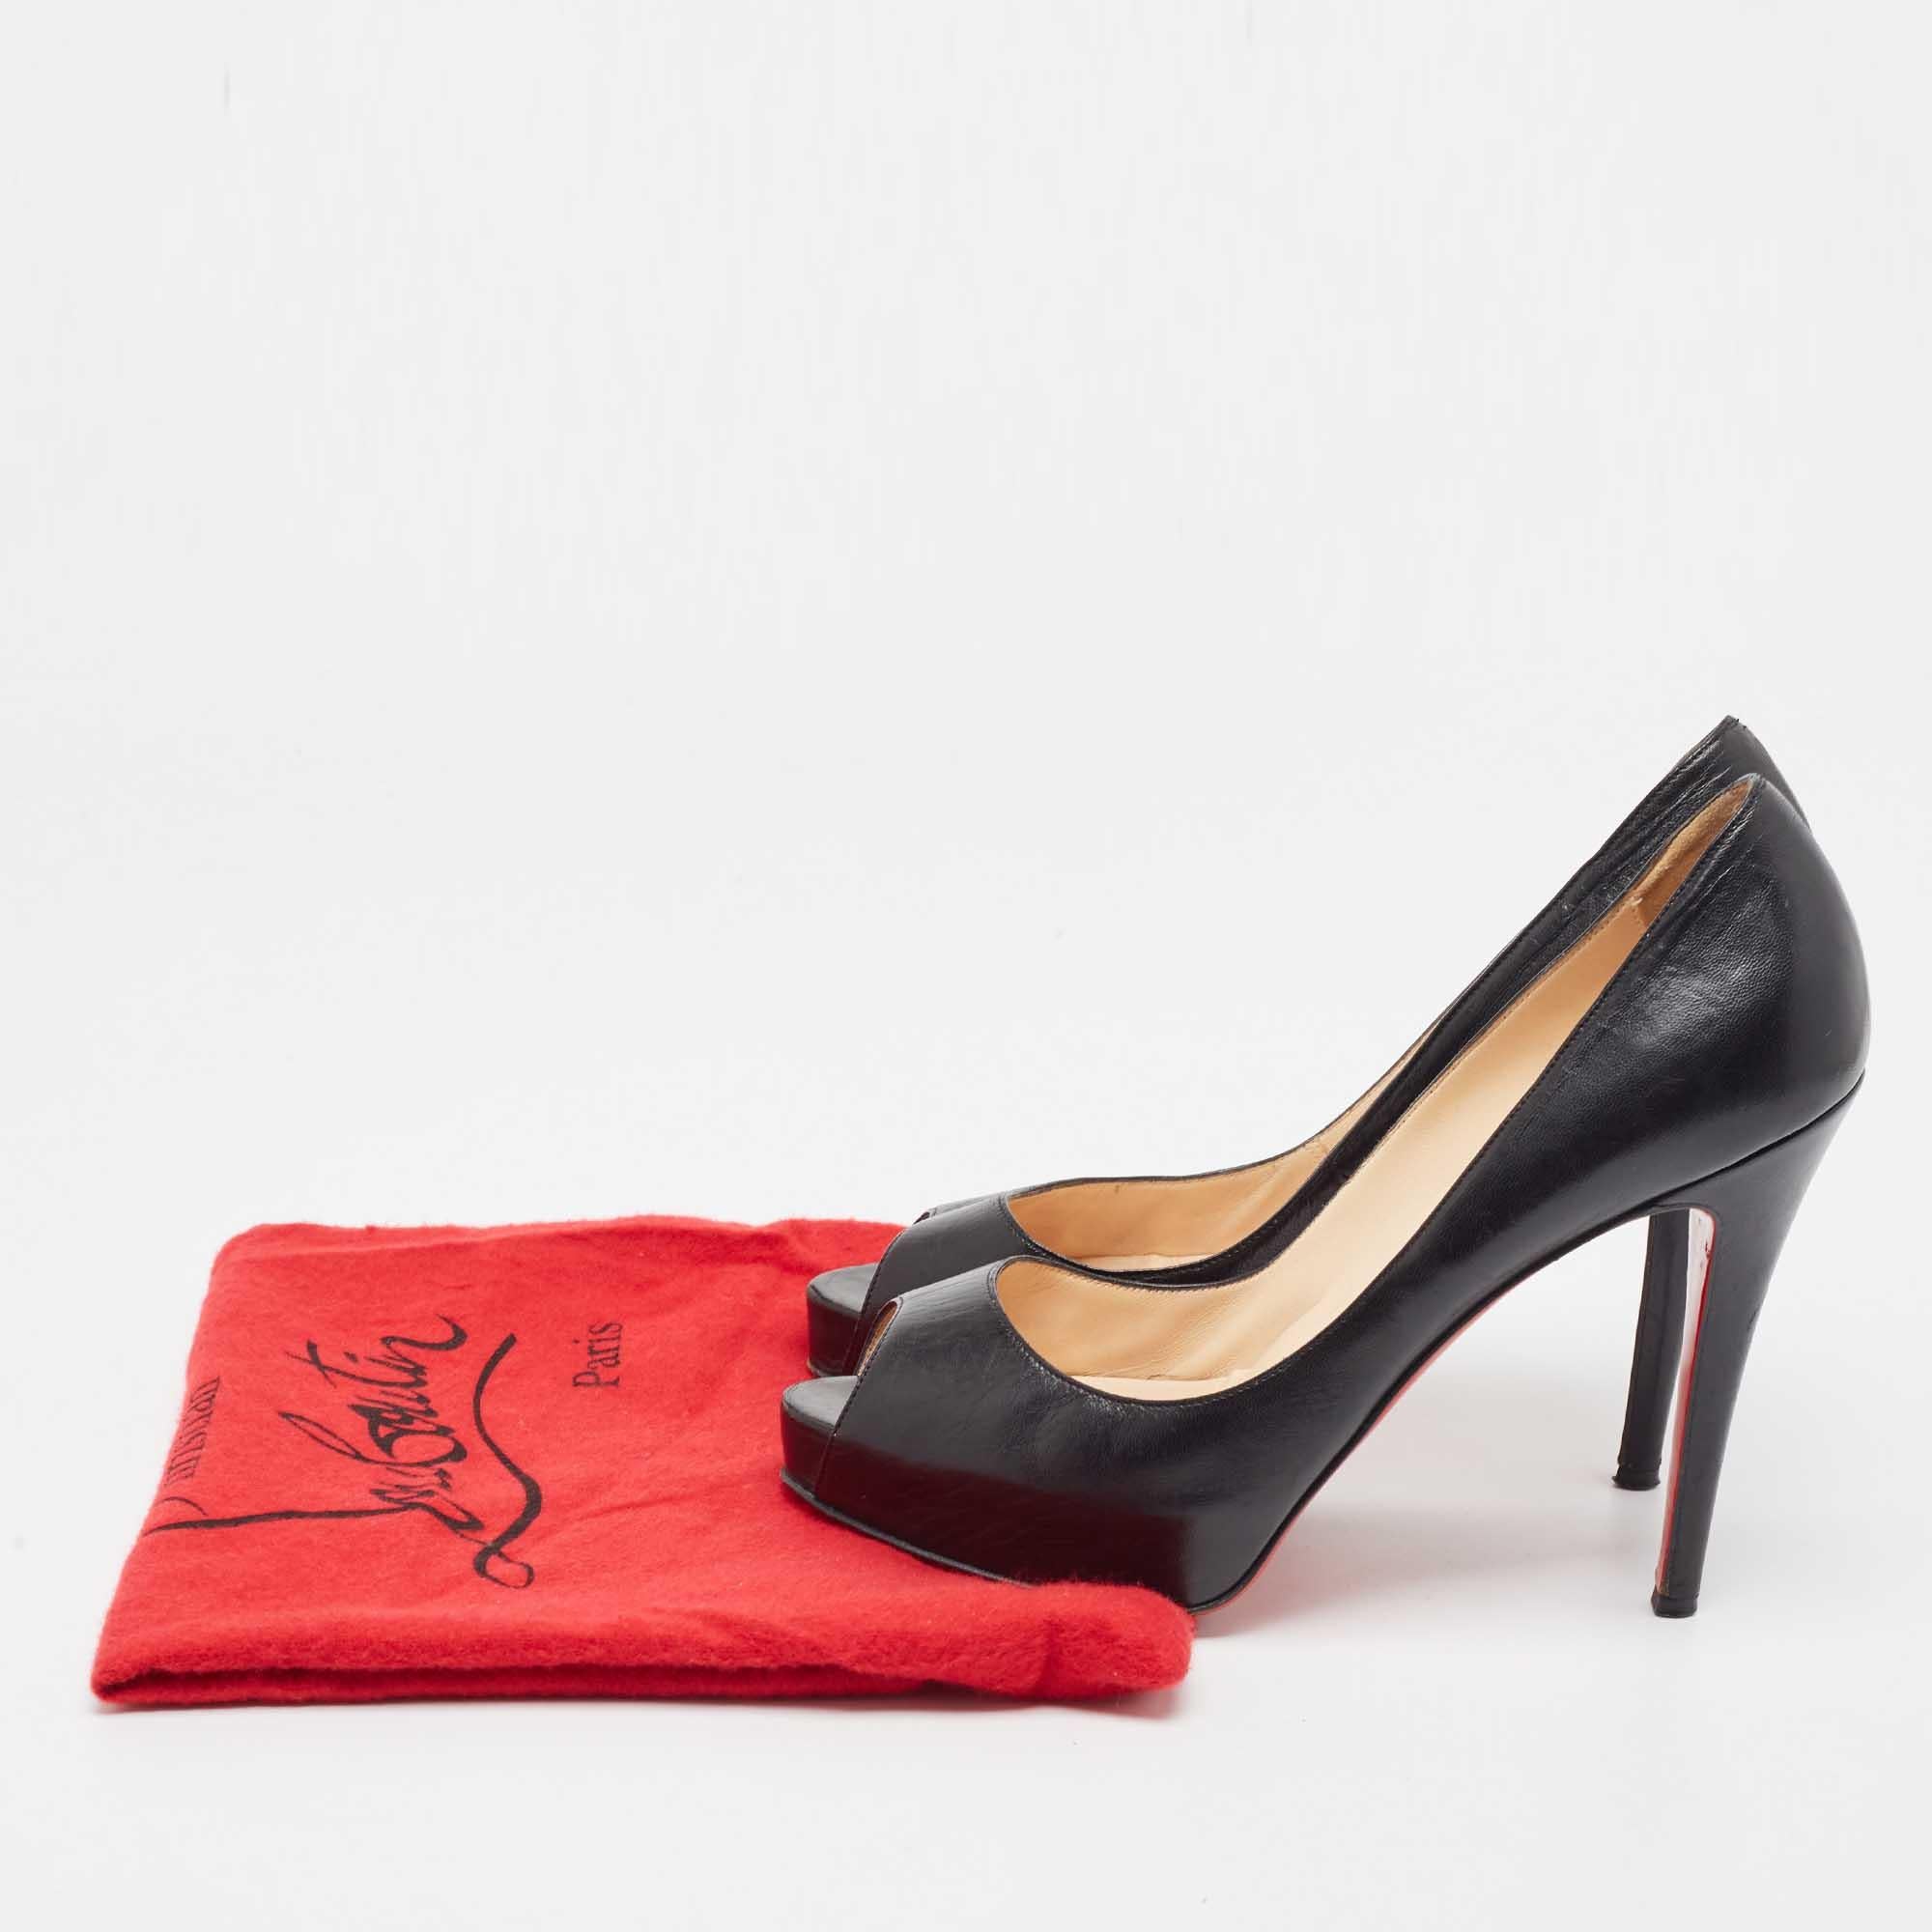 Christian Louboutin Black Leather Very Prive Pumps Size 37.5 For Sale 5